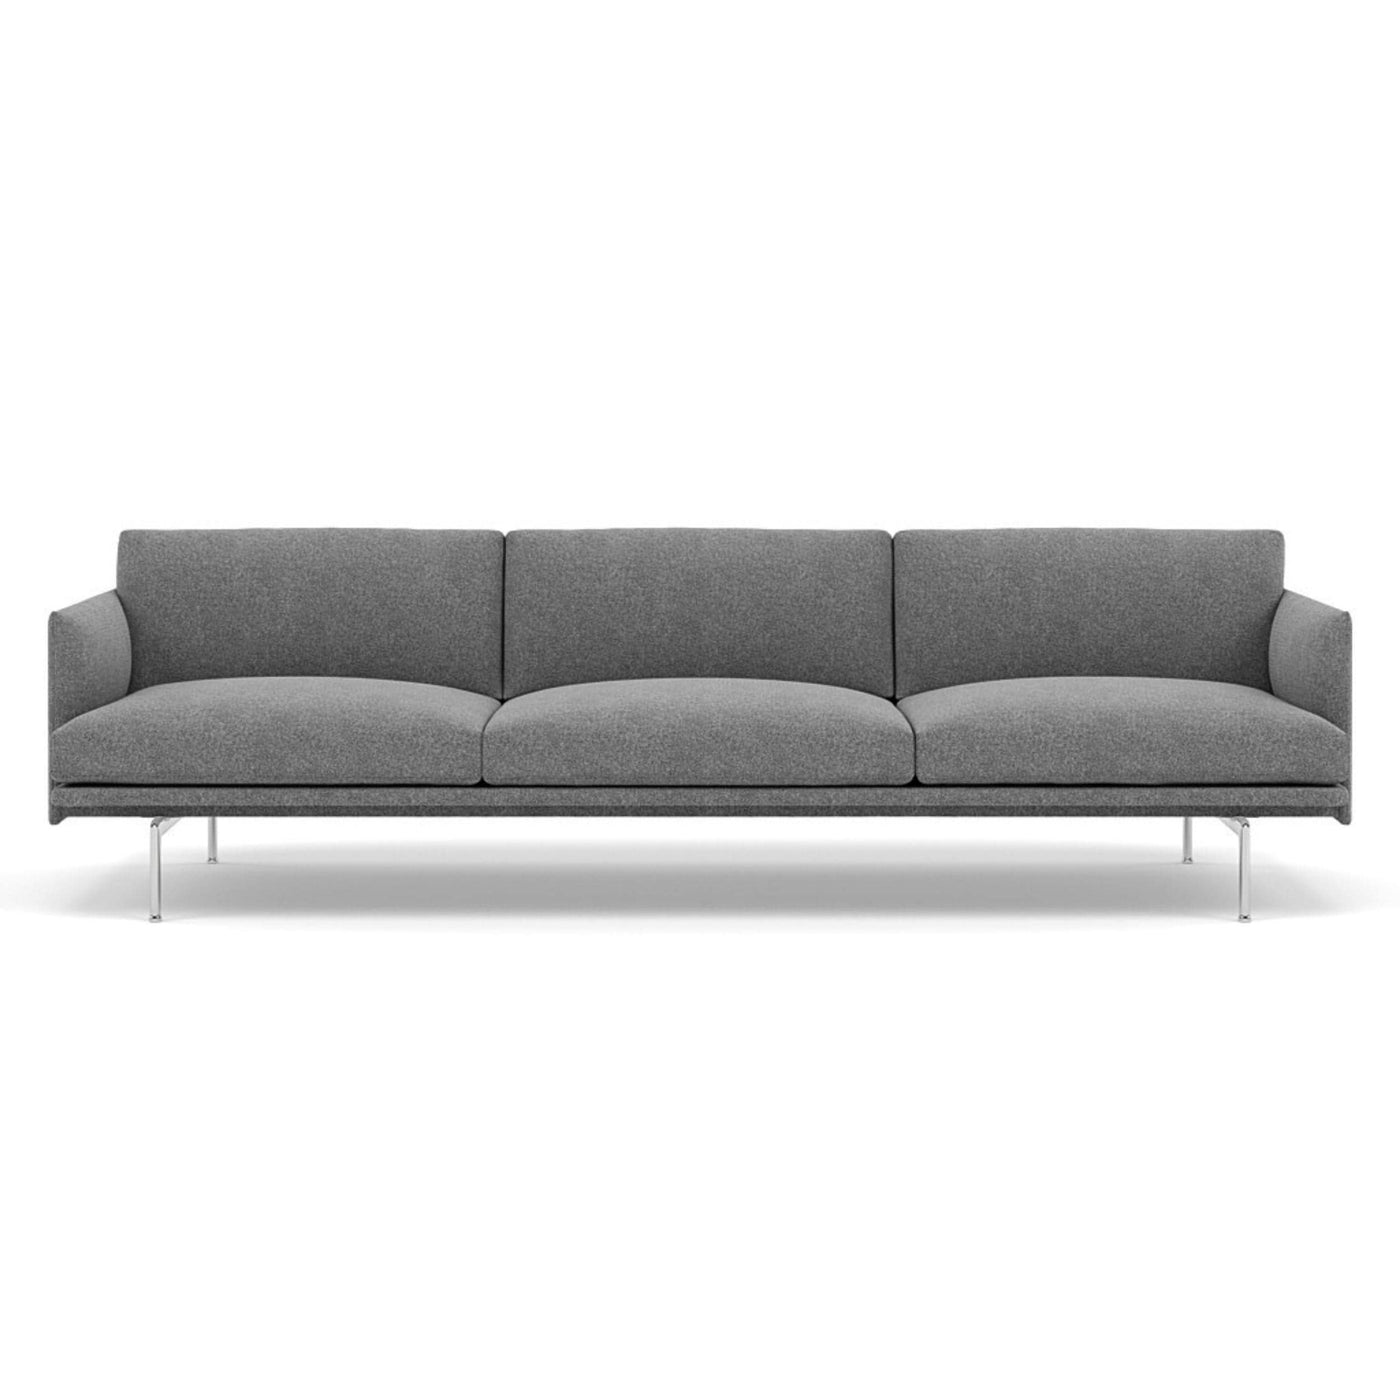 muuto outline 3.5 seater sofa in hallingdal 166 and polished aluminium legs. Made to order from someday designs . #colour_hallingdal-166